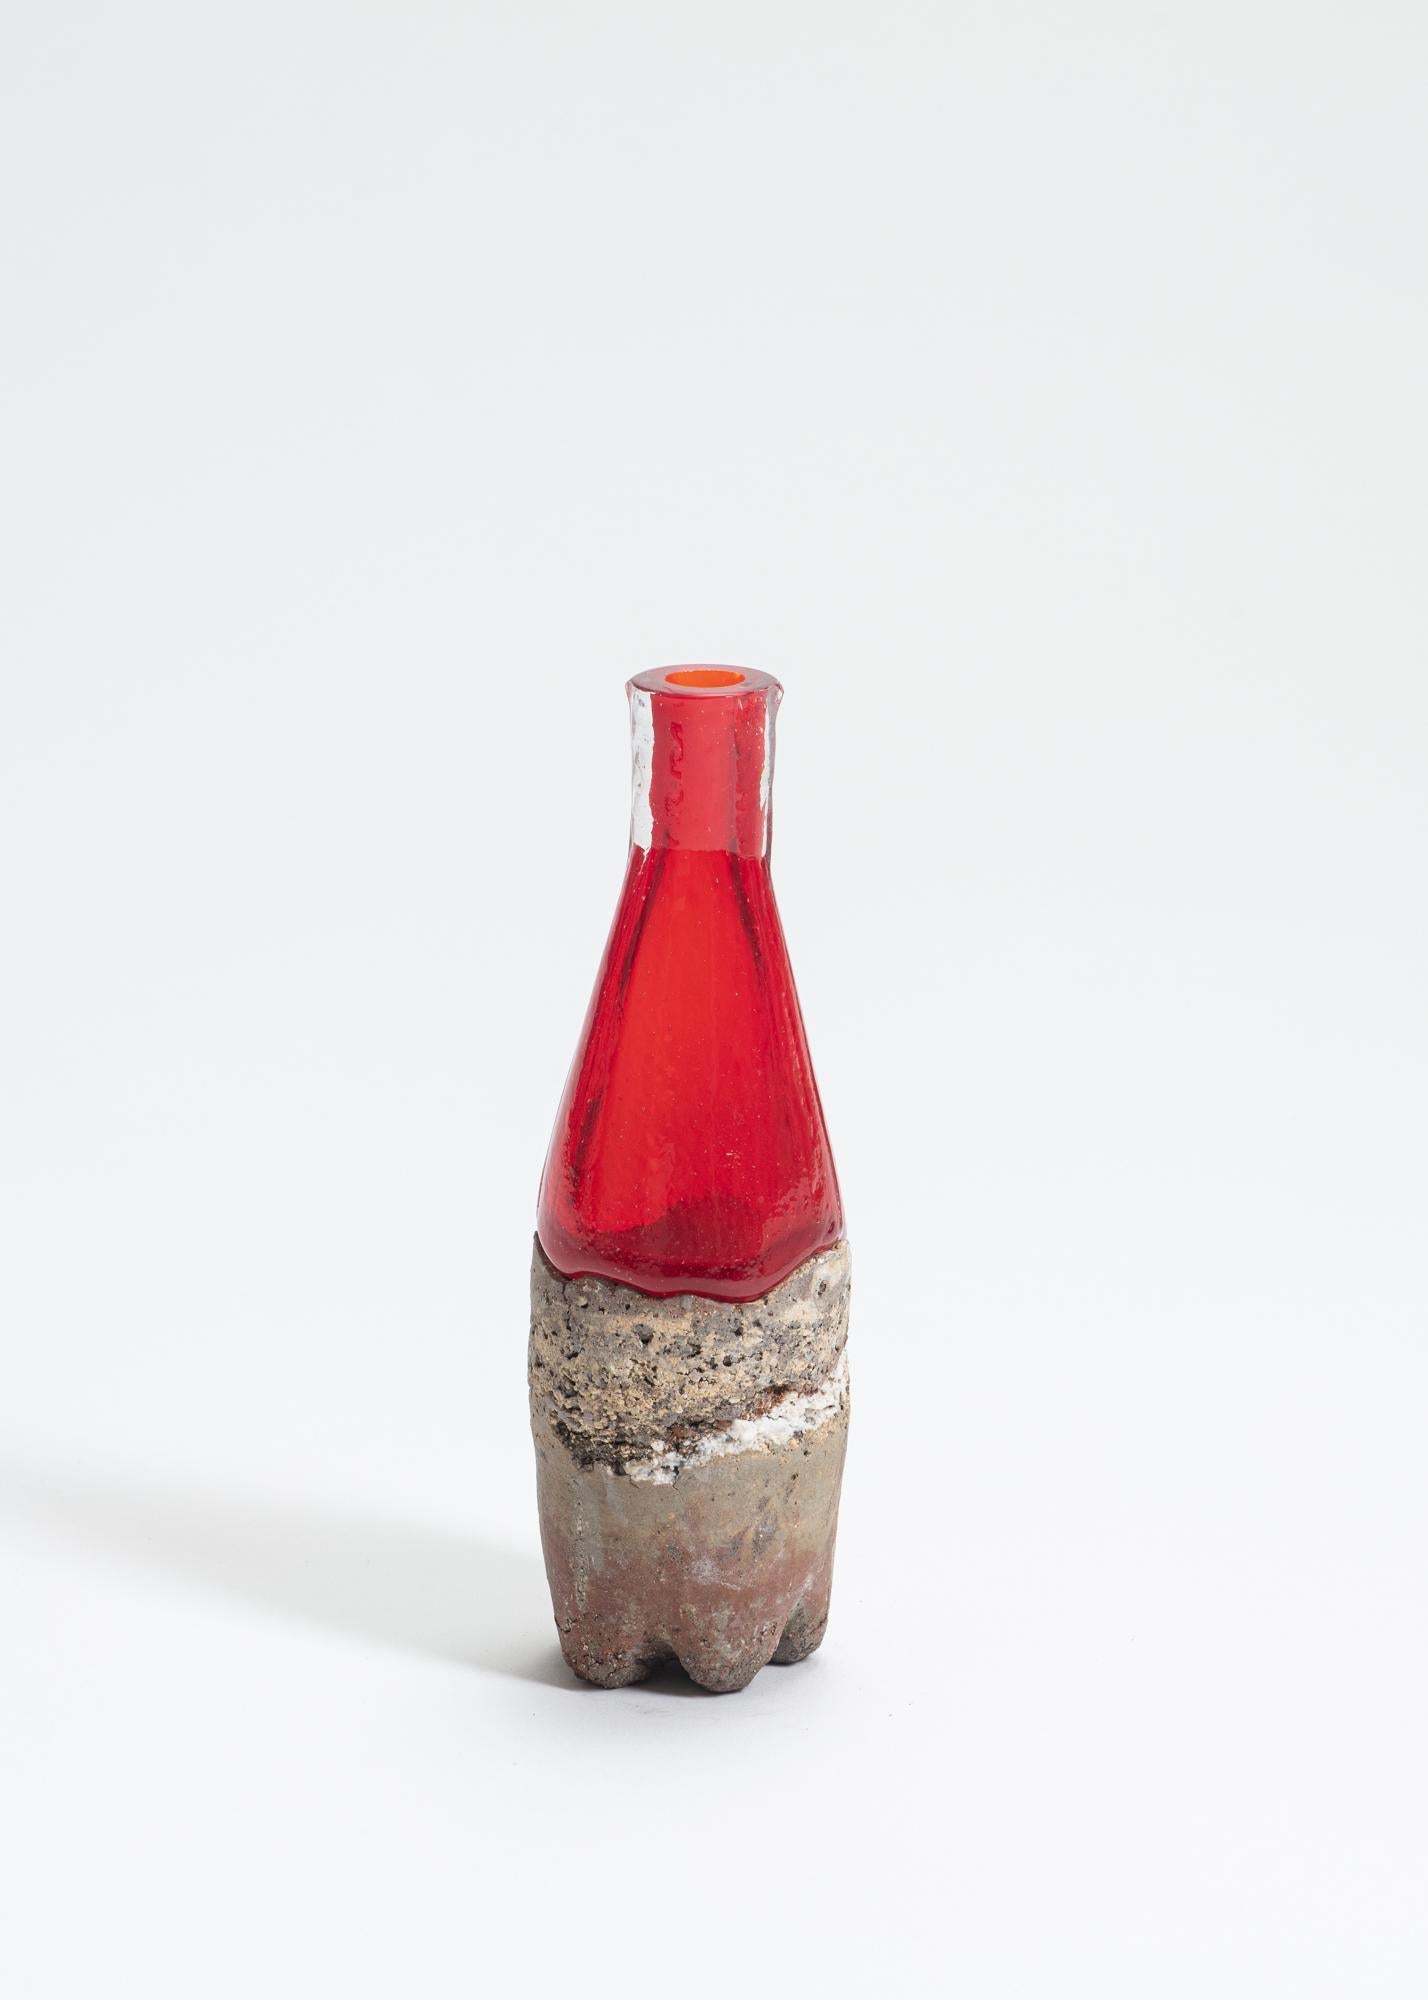 FUWA FUWA, No 15 bottle by Yusuke´ Y. Offhause
One of a Kind, the work is in two parts (ceramic and glass).
Dimensions: D 7 x W 7 x H 20.5 cm.
Materials: stoneware, porcelain, glass.

Yusuke´ Y. Offhause:
